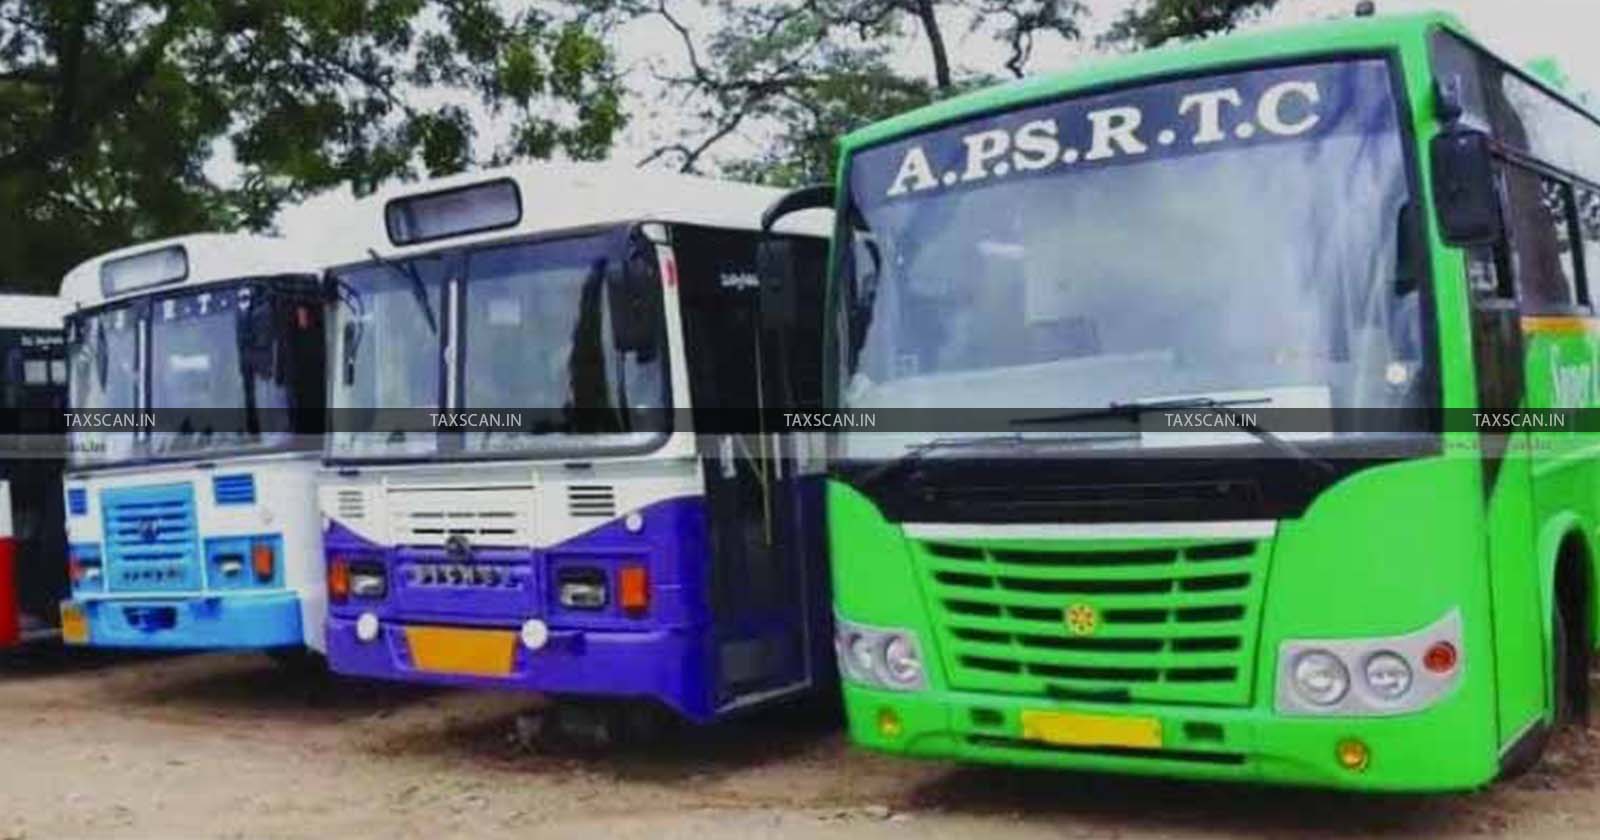 APSRTC - Customs - Excise and Service Tax Appellate Tribunal - TAXSCAN